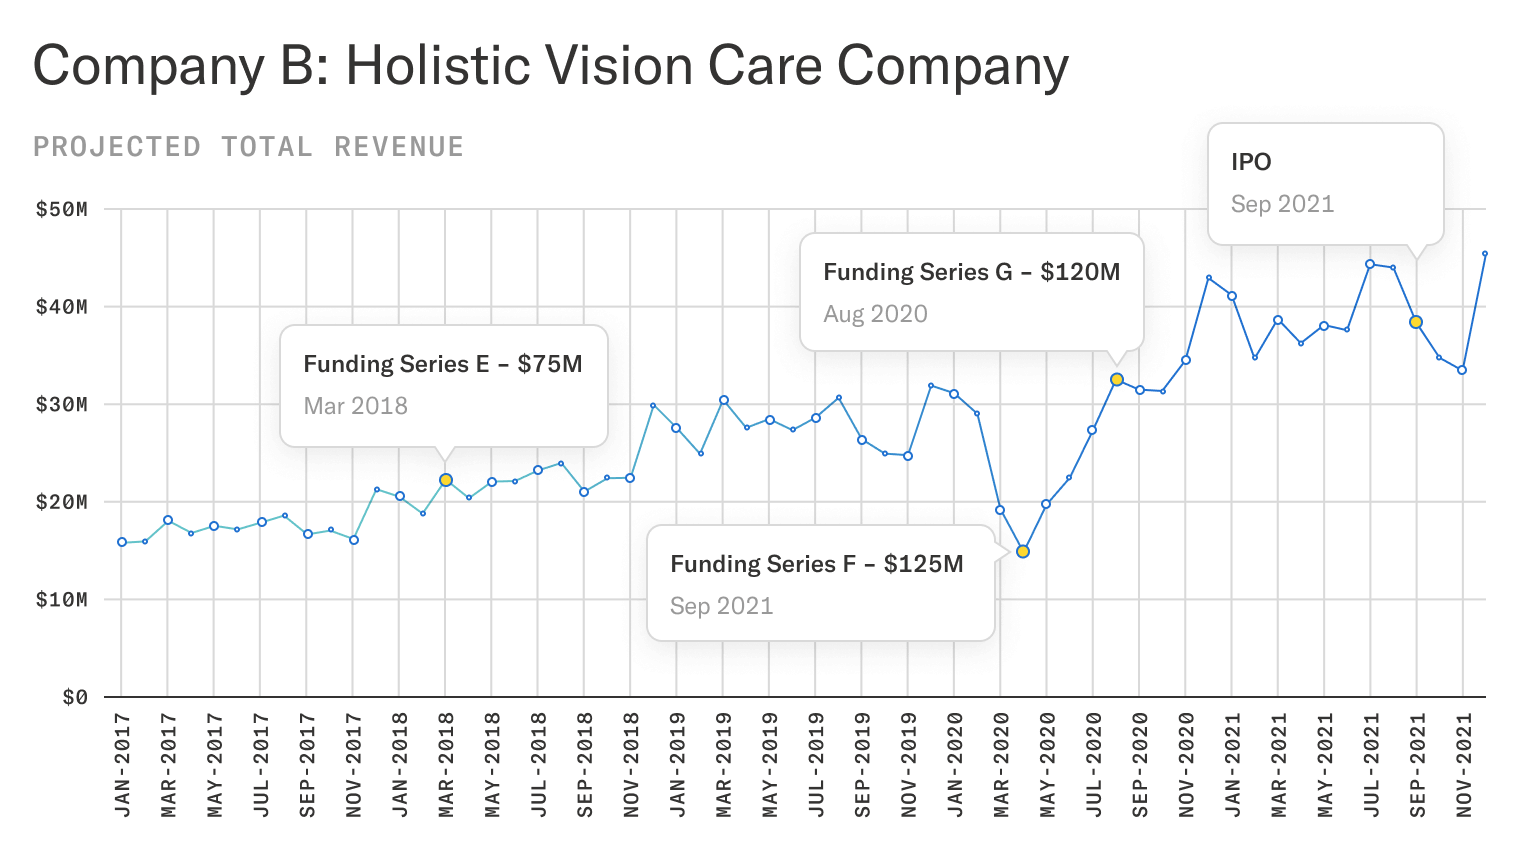 Projected total monthly revenue chart for a holistic vision care company